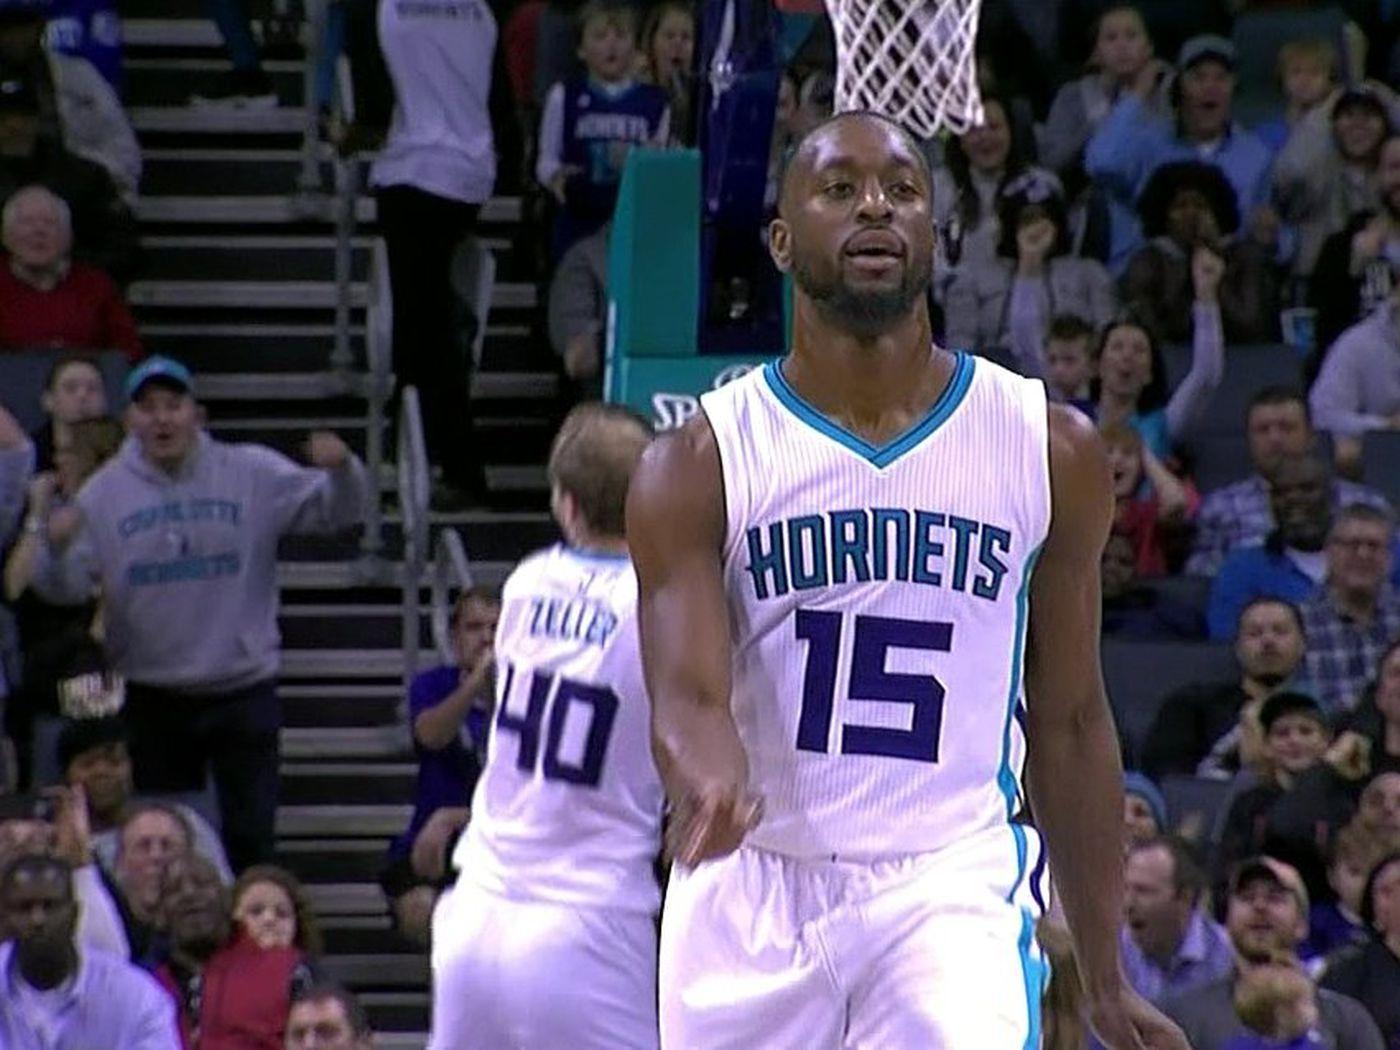 Kemba Walker does emphatic celebration shimmy while his shot rims